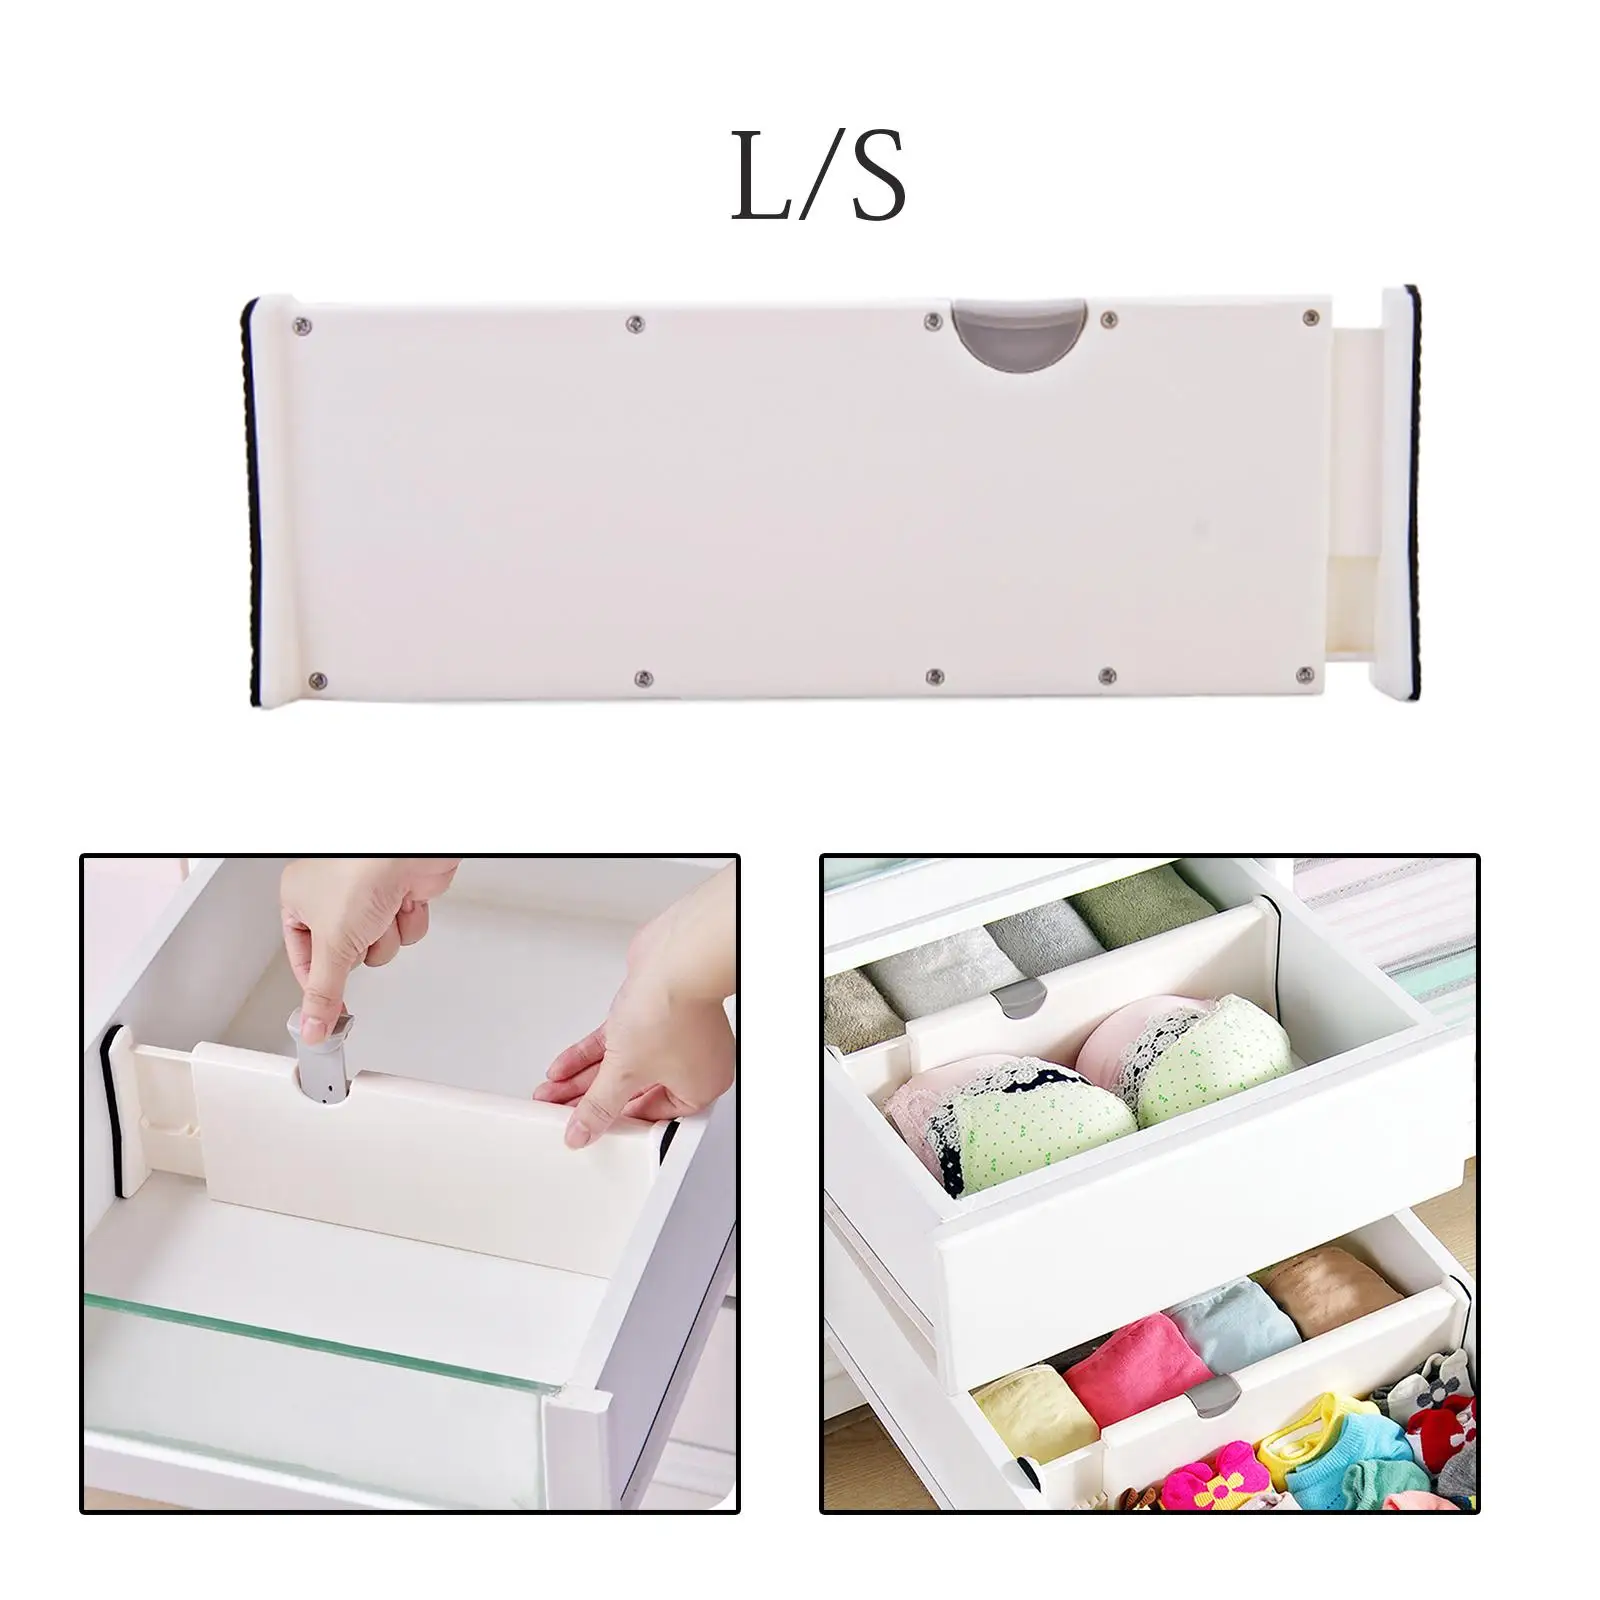 Storage Drawers Divider Retractable Household Tools ABS Plastic Dresser Organizer for Bedroom Cabinet Clothing Desk Teen Adults